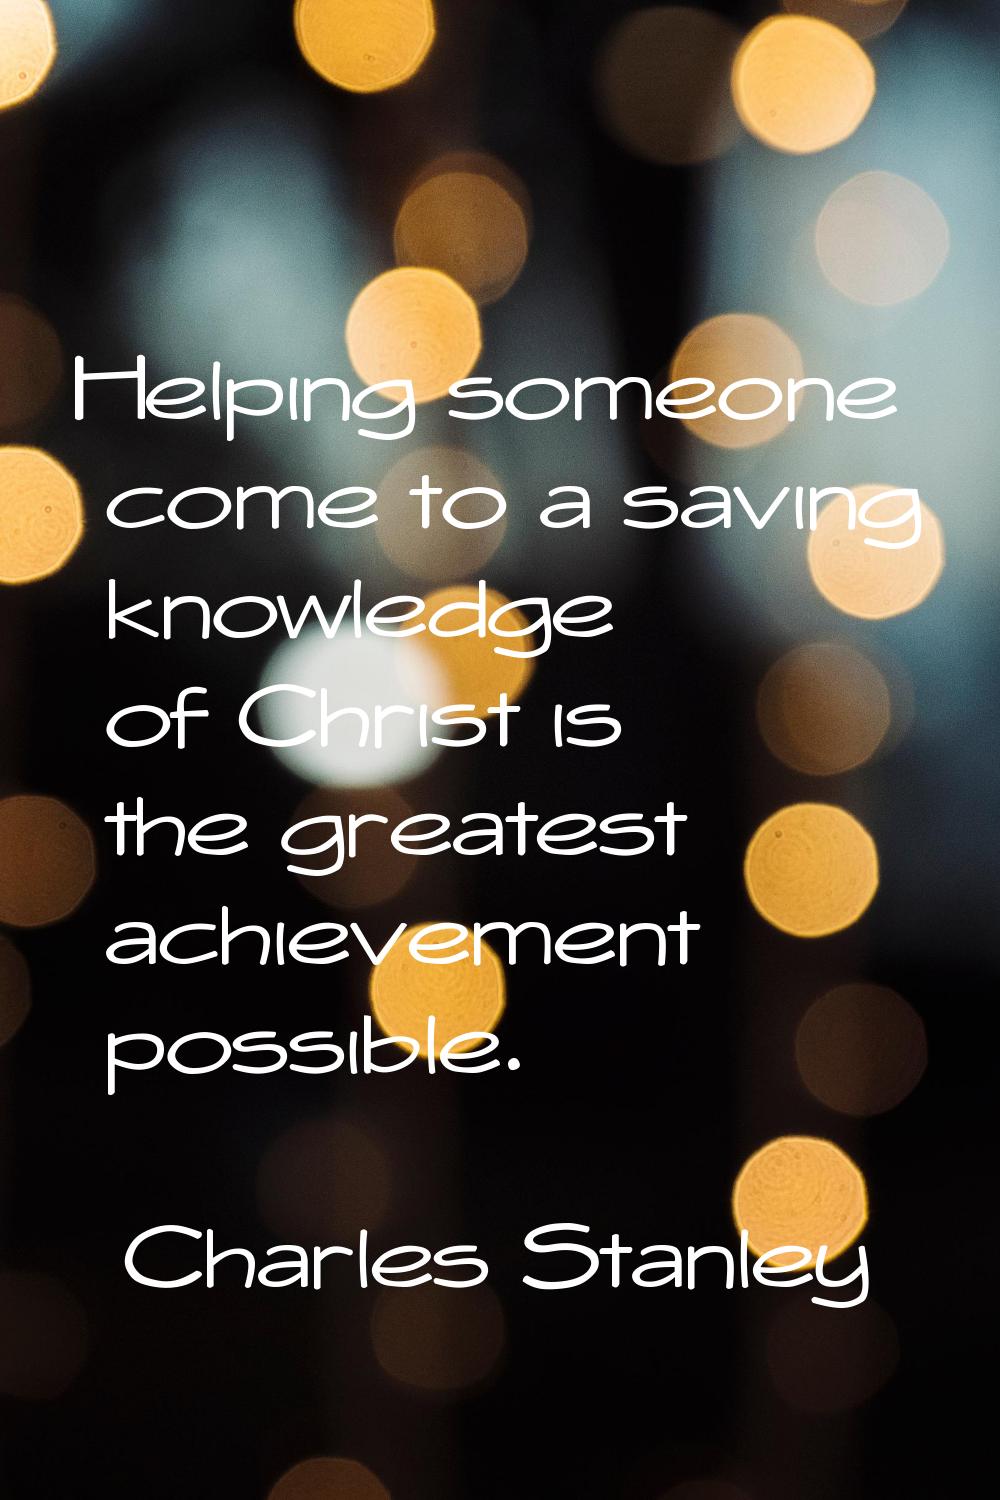 Helping someone come to a saving knowledge of Christ is the greatest achievement possible.